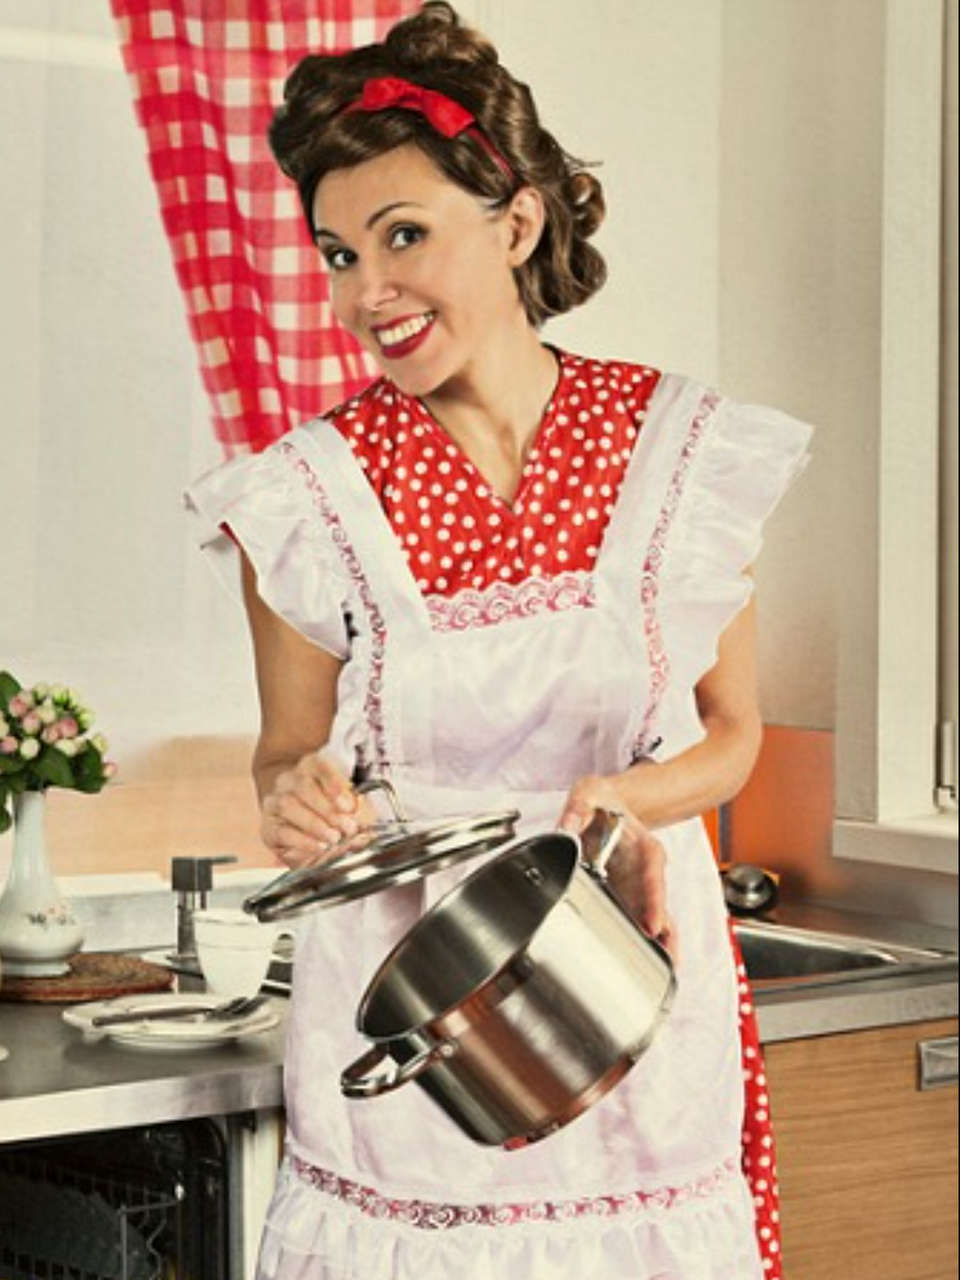 Me As Your Classic 1950s Housewife What Do You Thin